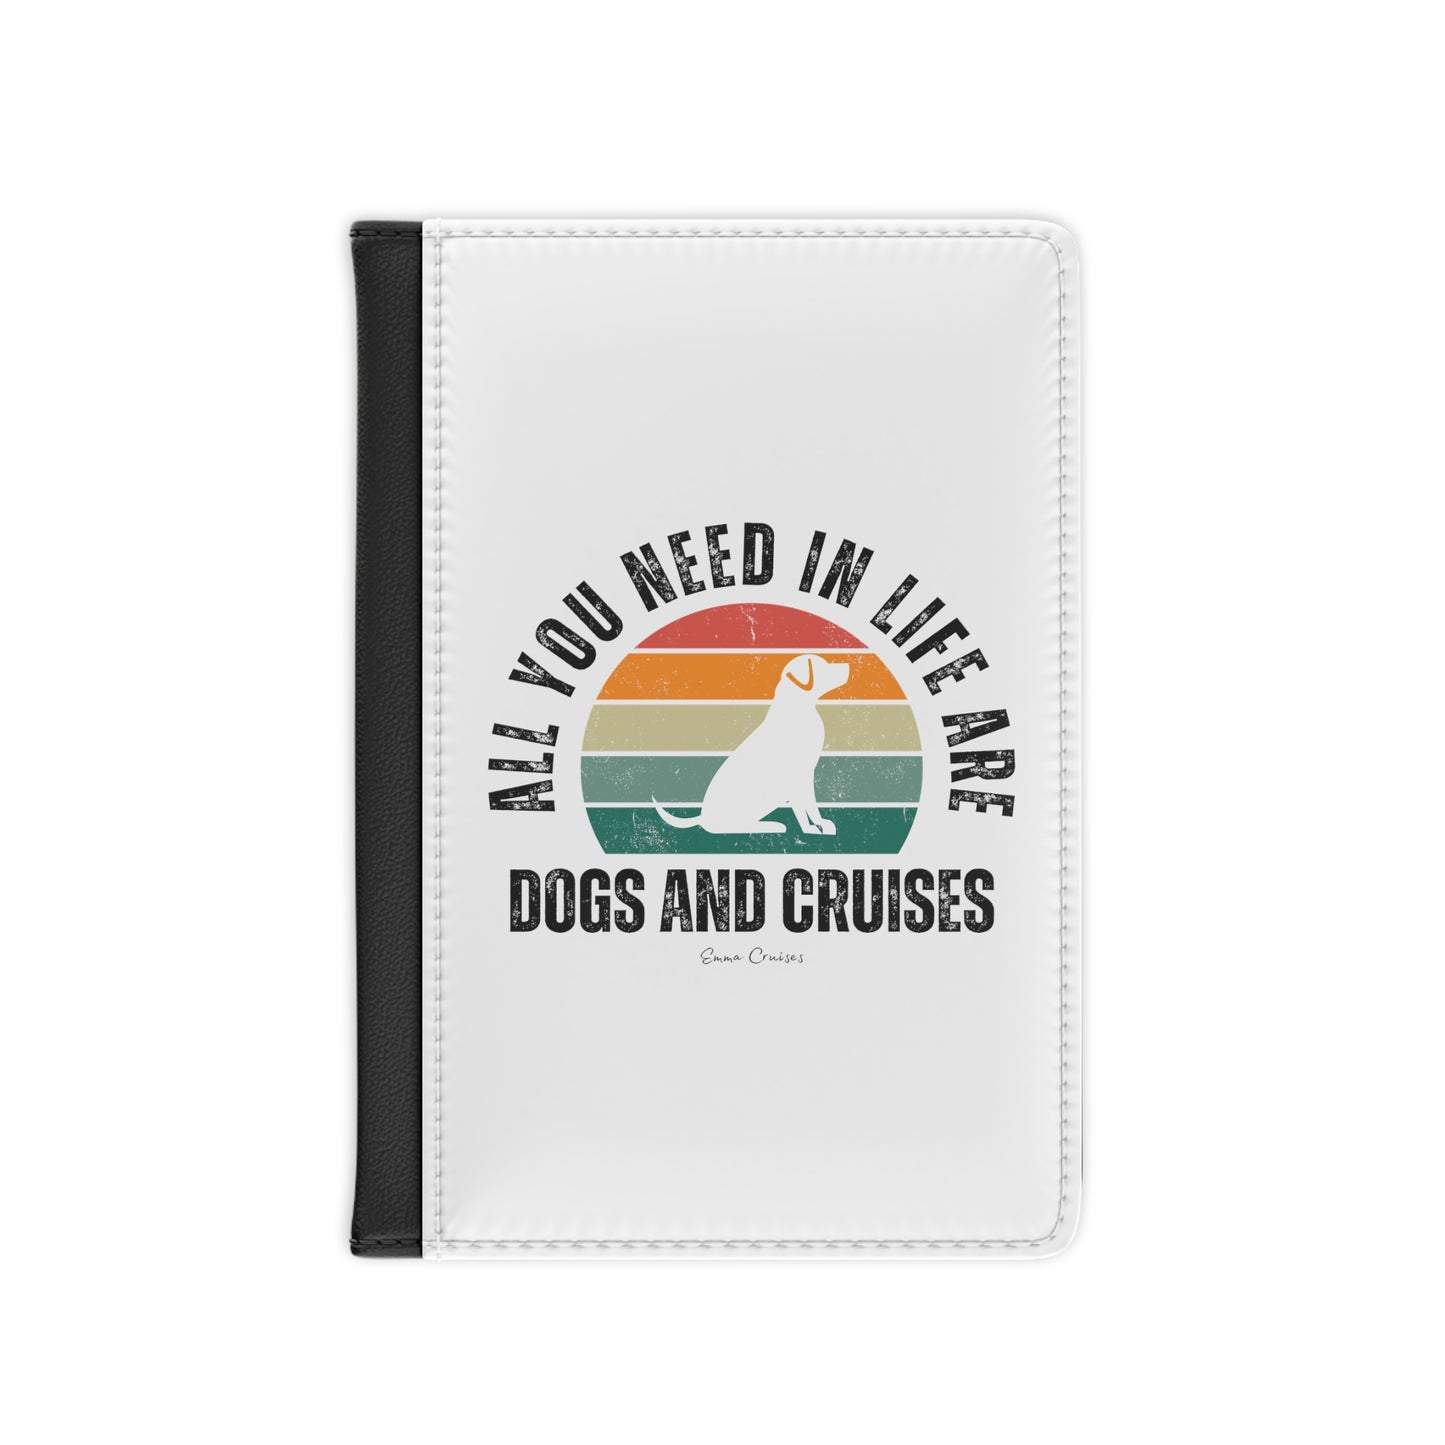 Dogs and Cruises - Passport Cover